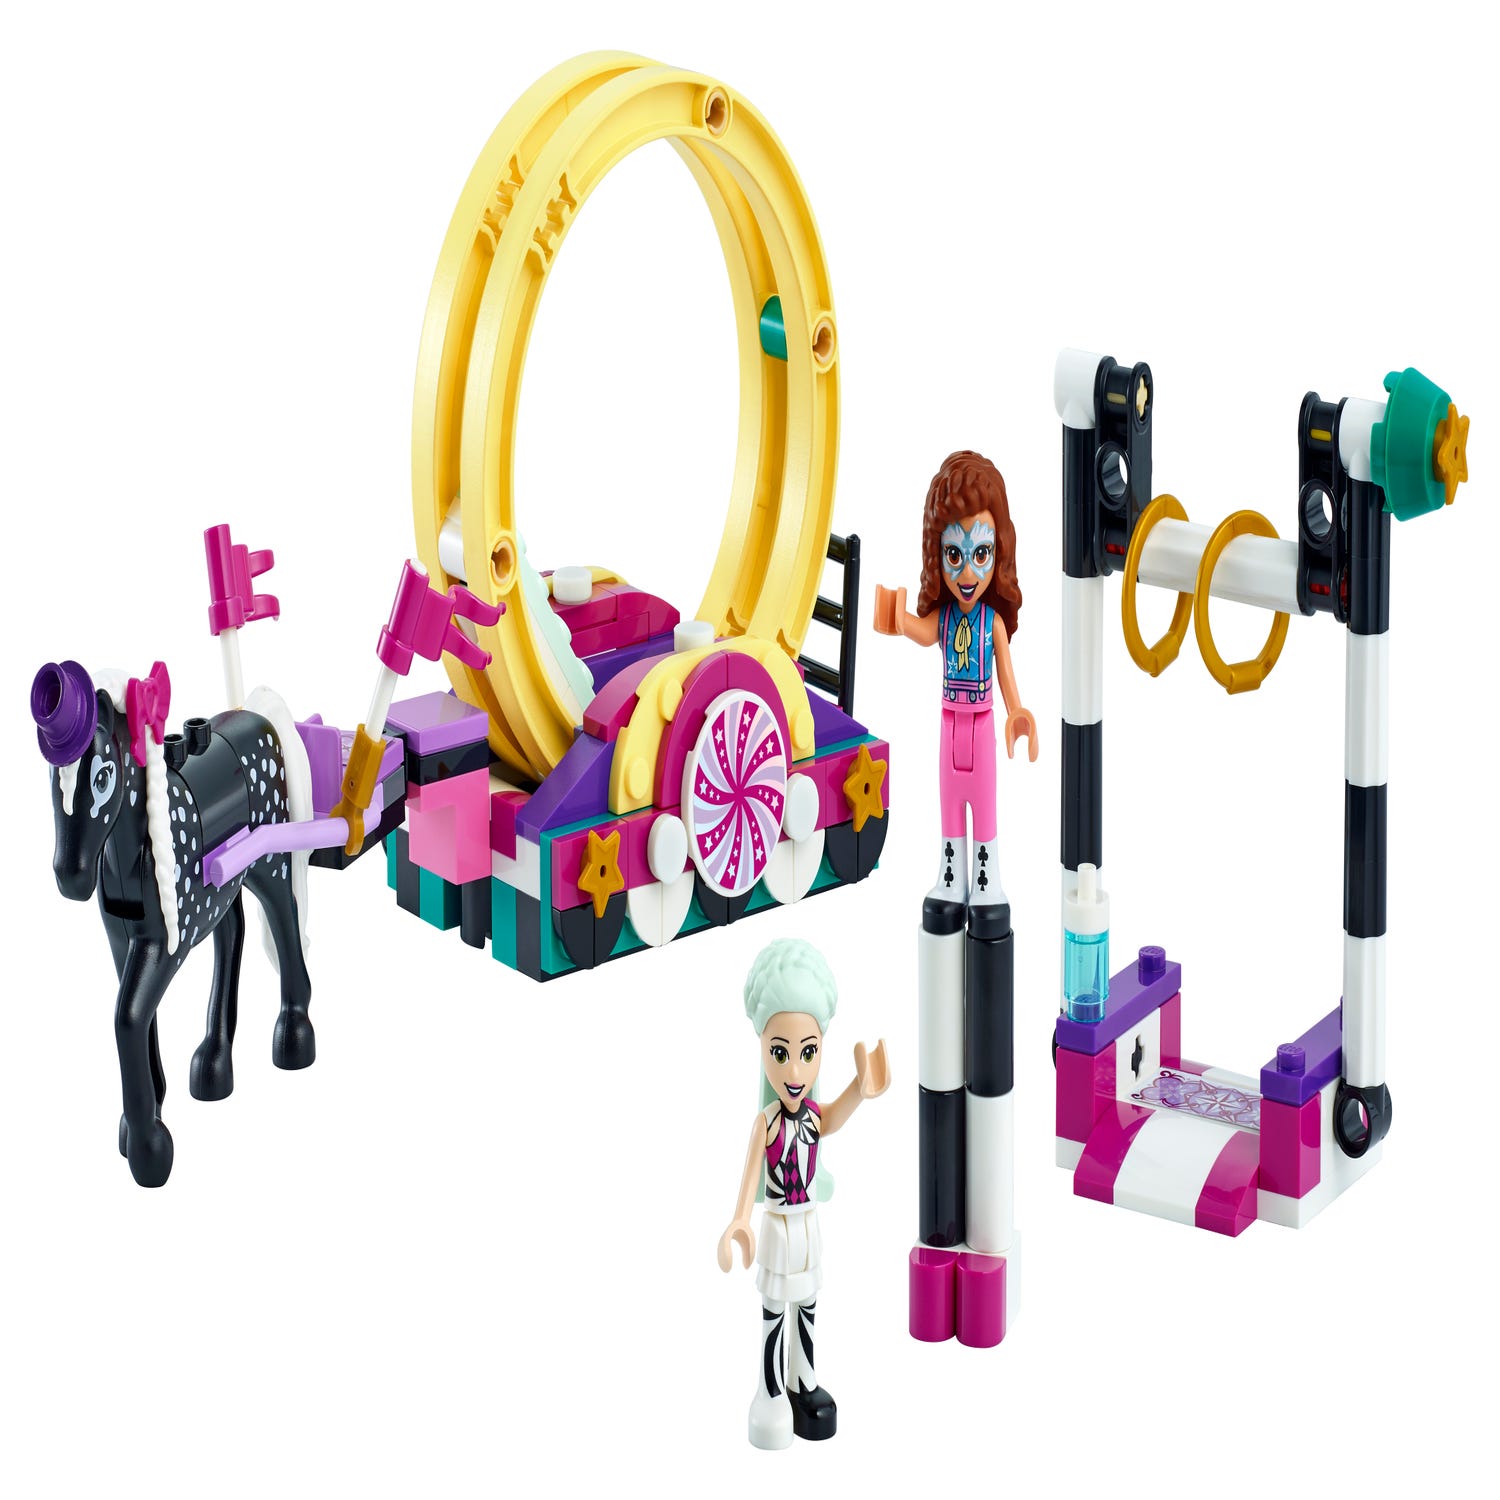 Magical Acrobatics 41686 | Friends | Buy online the Official LEGO® Shop ID